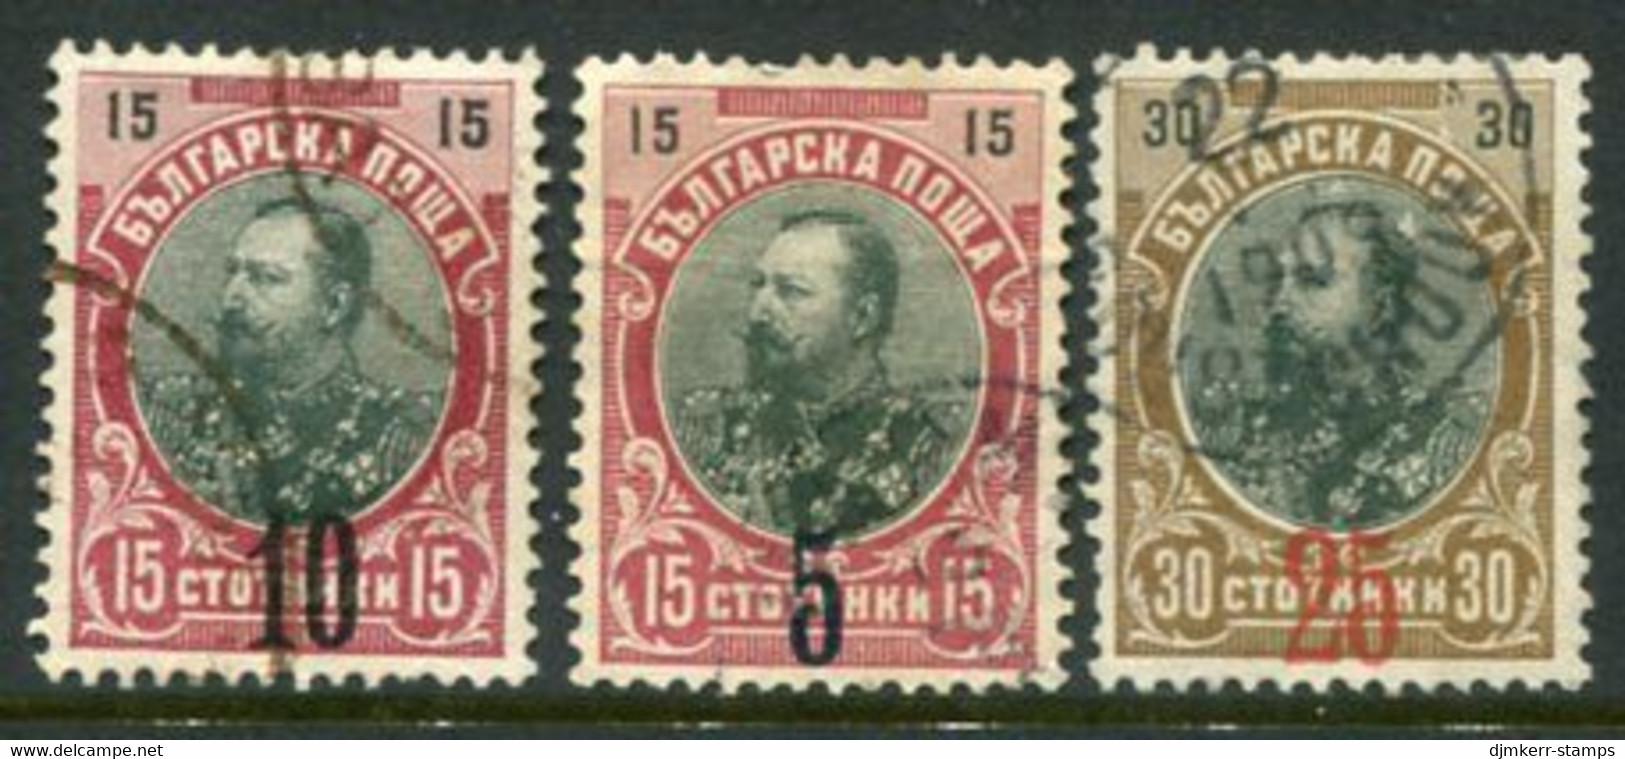 BULGARIA 1903-09  Surcharges 10 On 15 St. 5 On 15 St. And 25 On 30 St. Used.  Michel 65, 69-70 - Usati